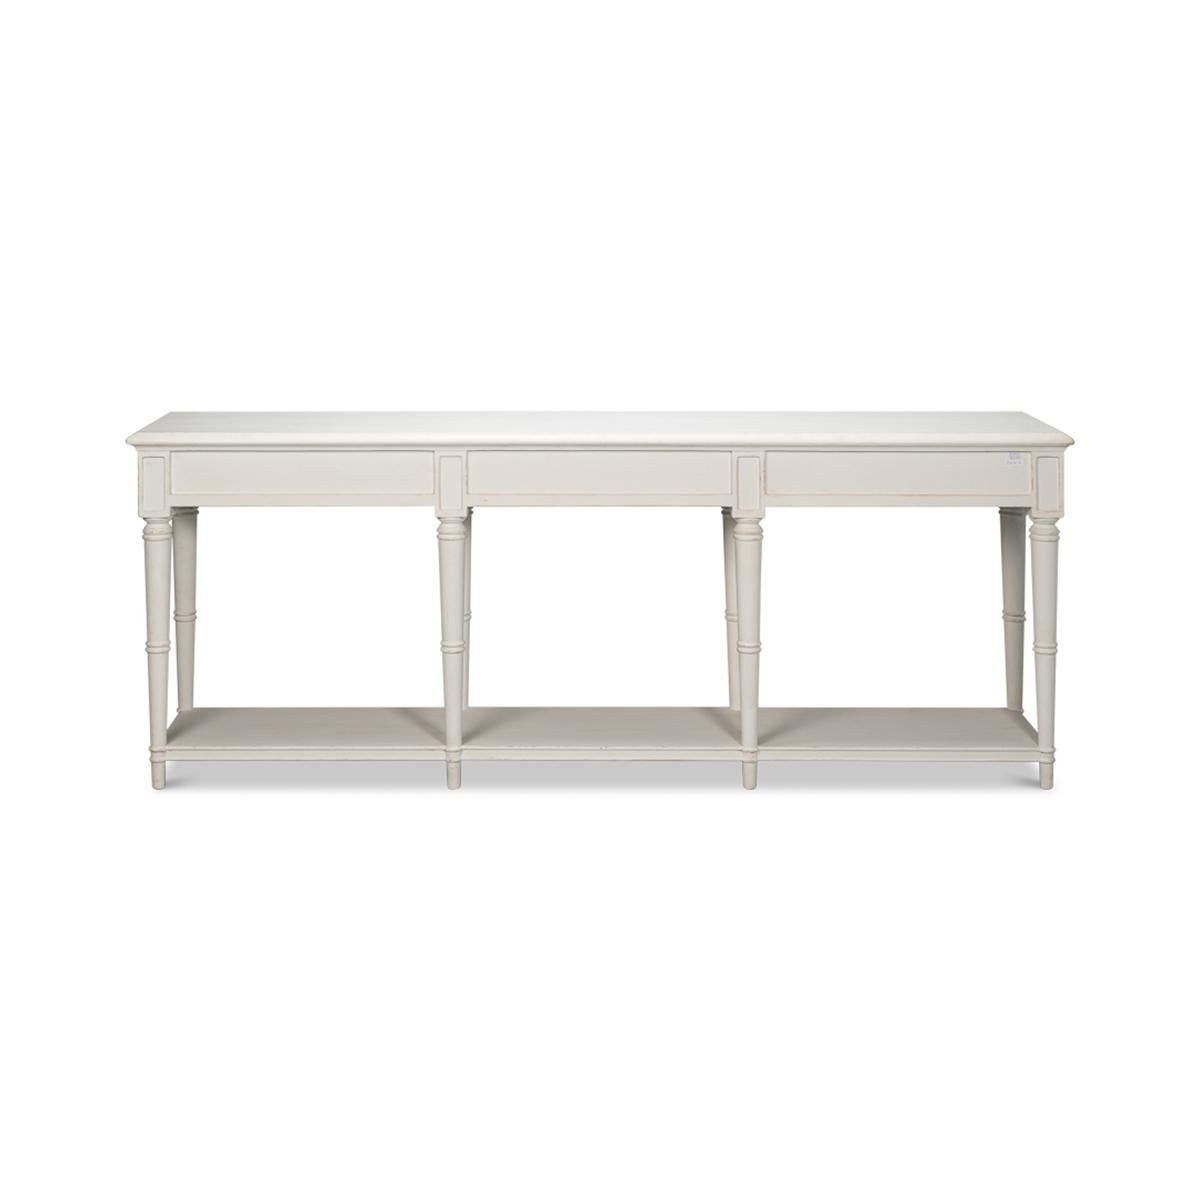 Contemporary Large French Country Console Table, Antique White For Sale